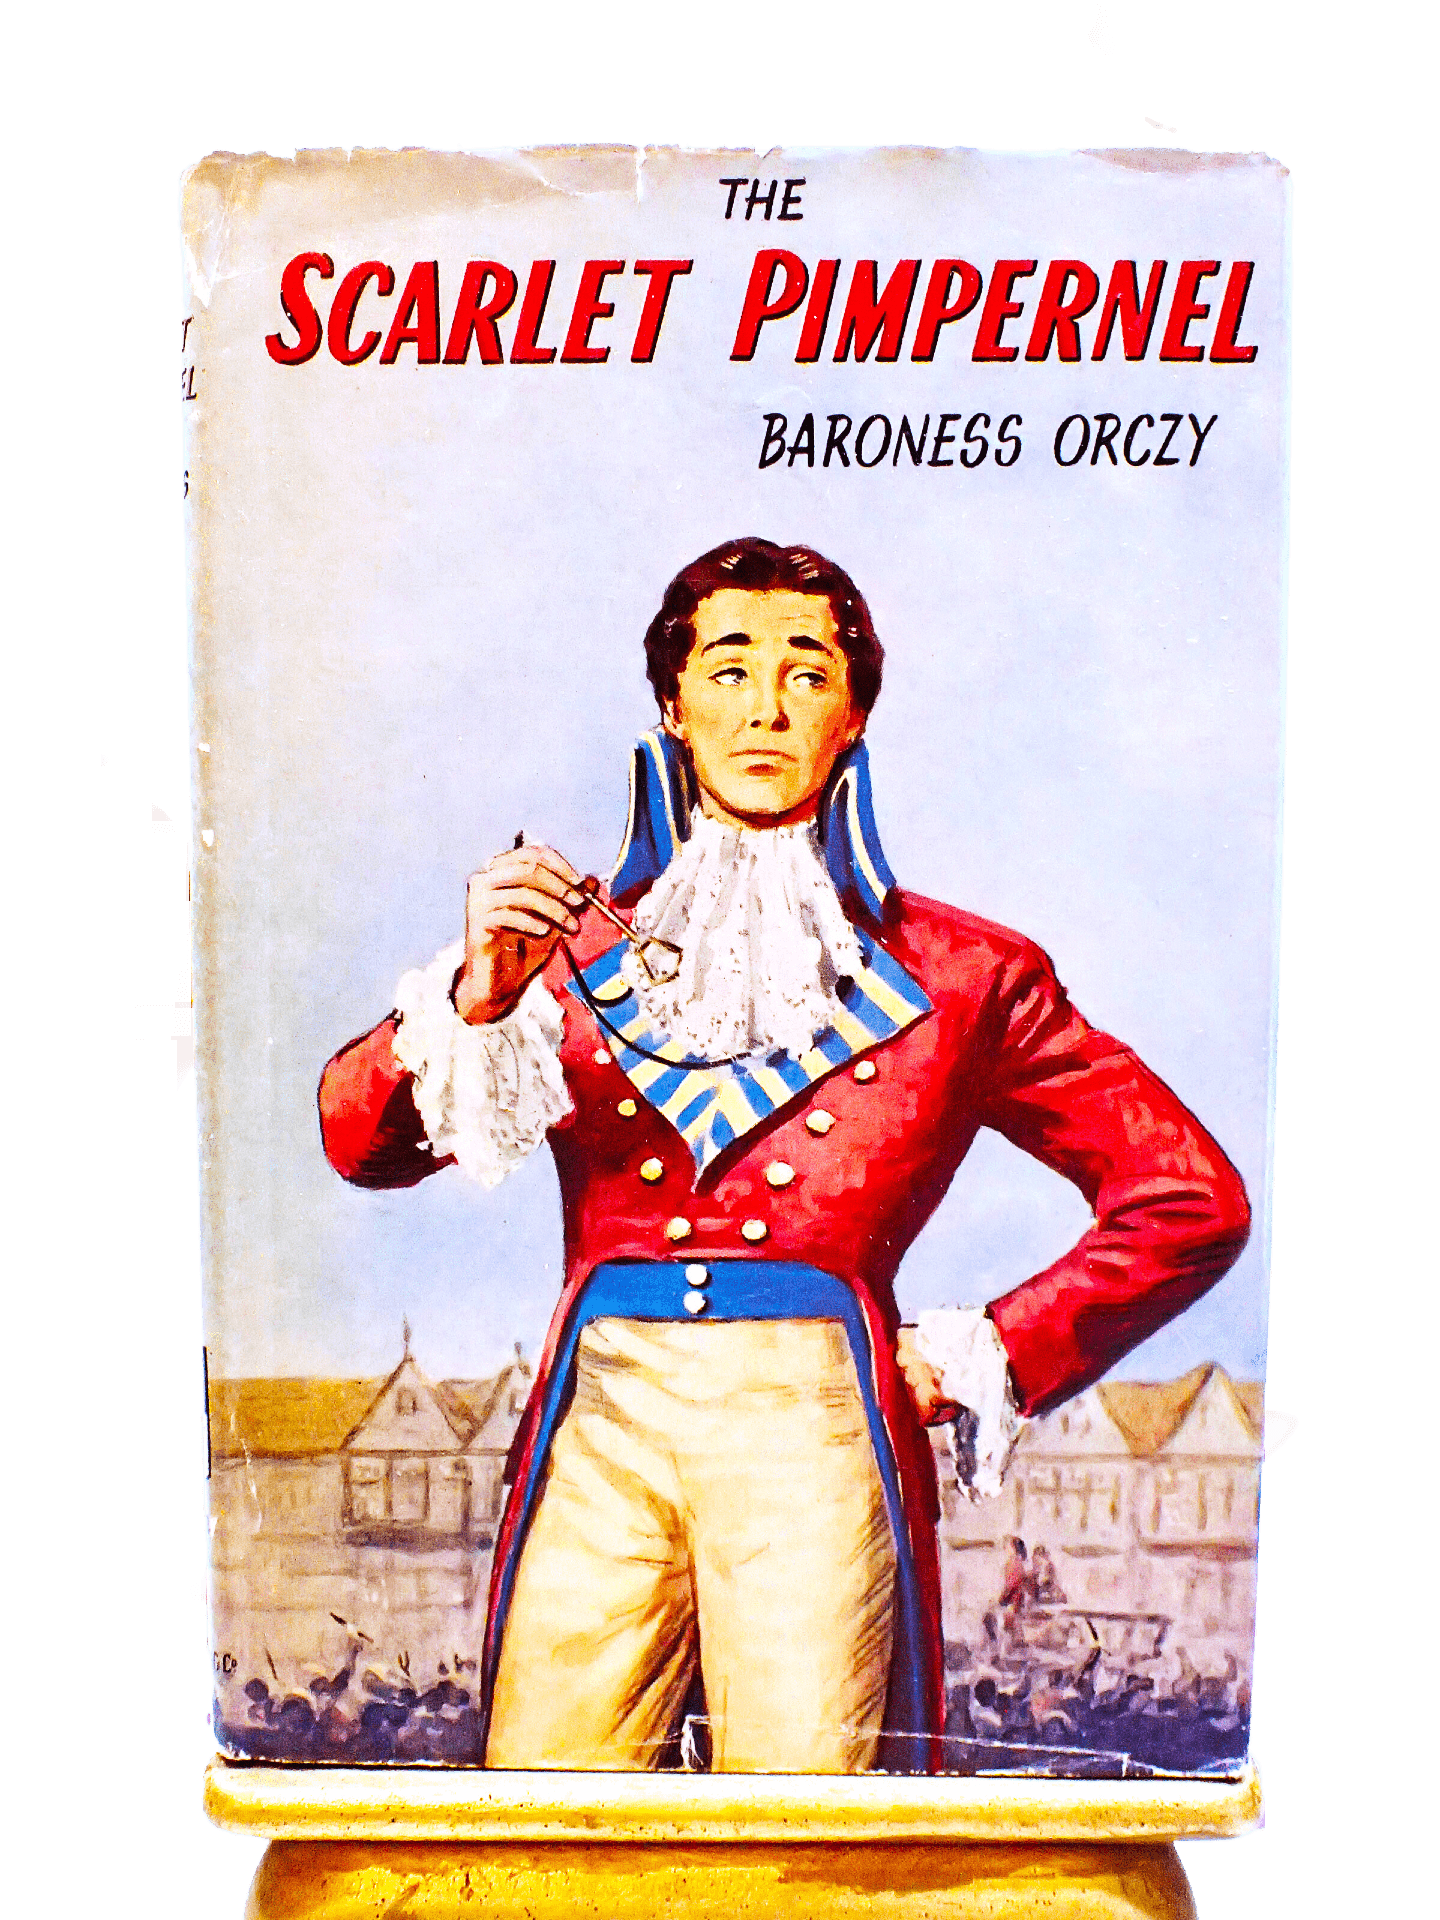 Front Cover of The Scarlet Pimpernel by Baroness Orczy Thrilling Romance Classic 1940's Vintage Book showing Sir Percy Blakeney looking foppish. 